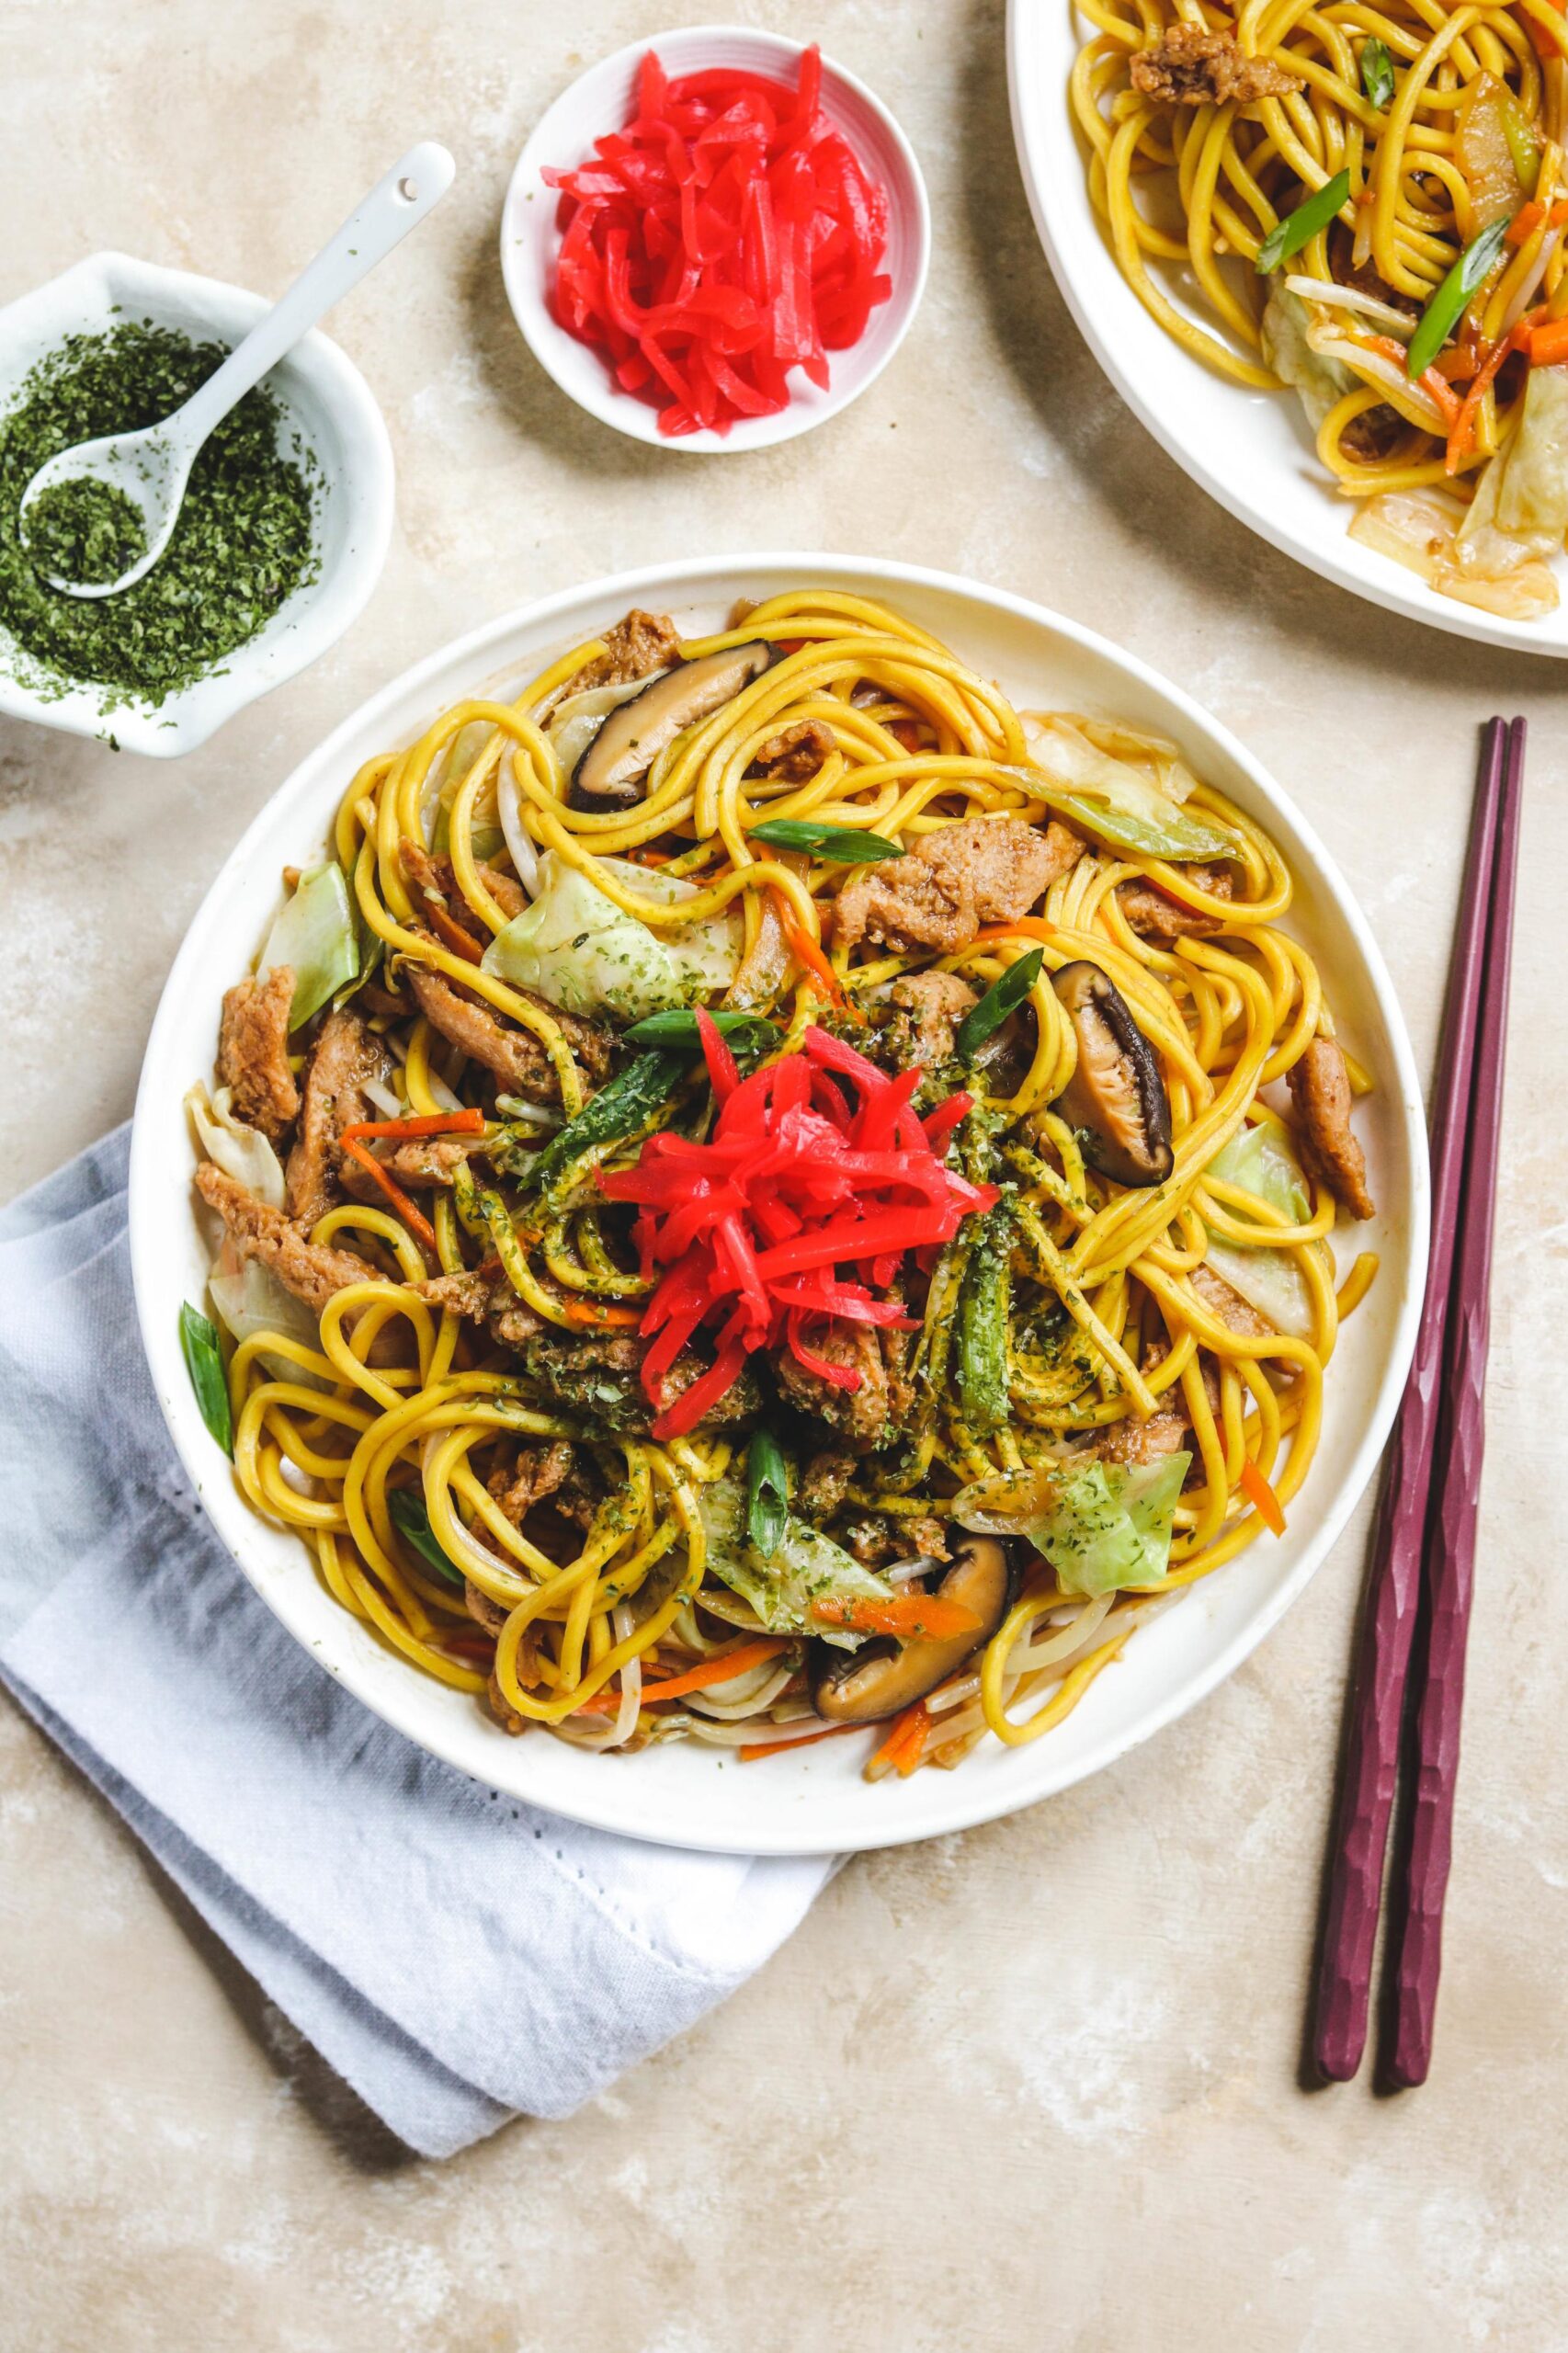  Your tastebuds are going to go absolutely wild with these irresistible noodles!